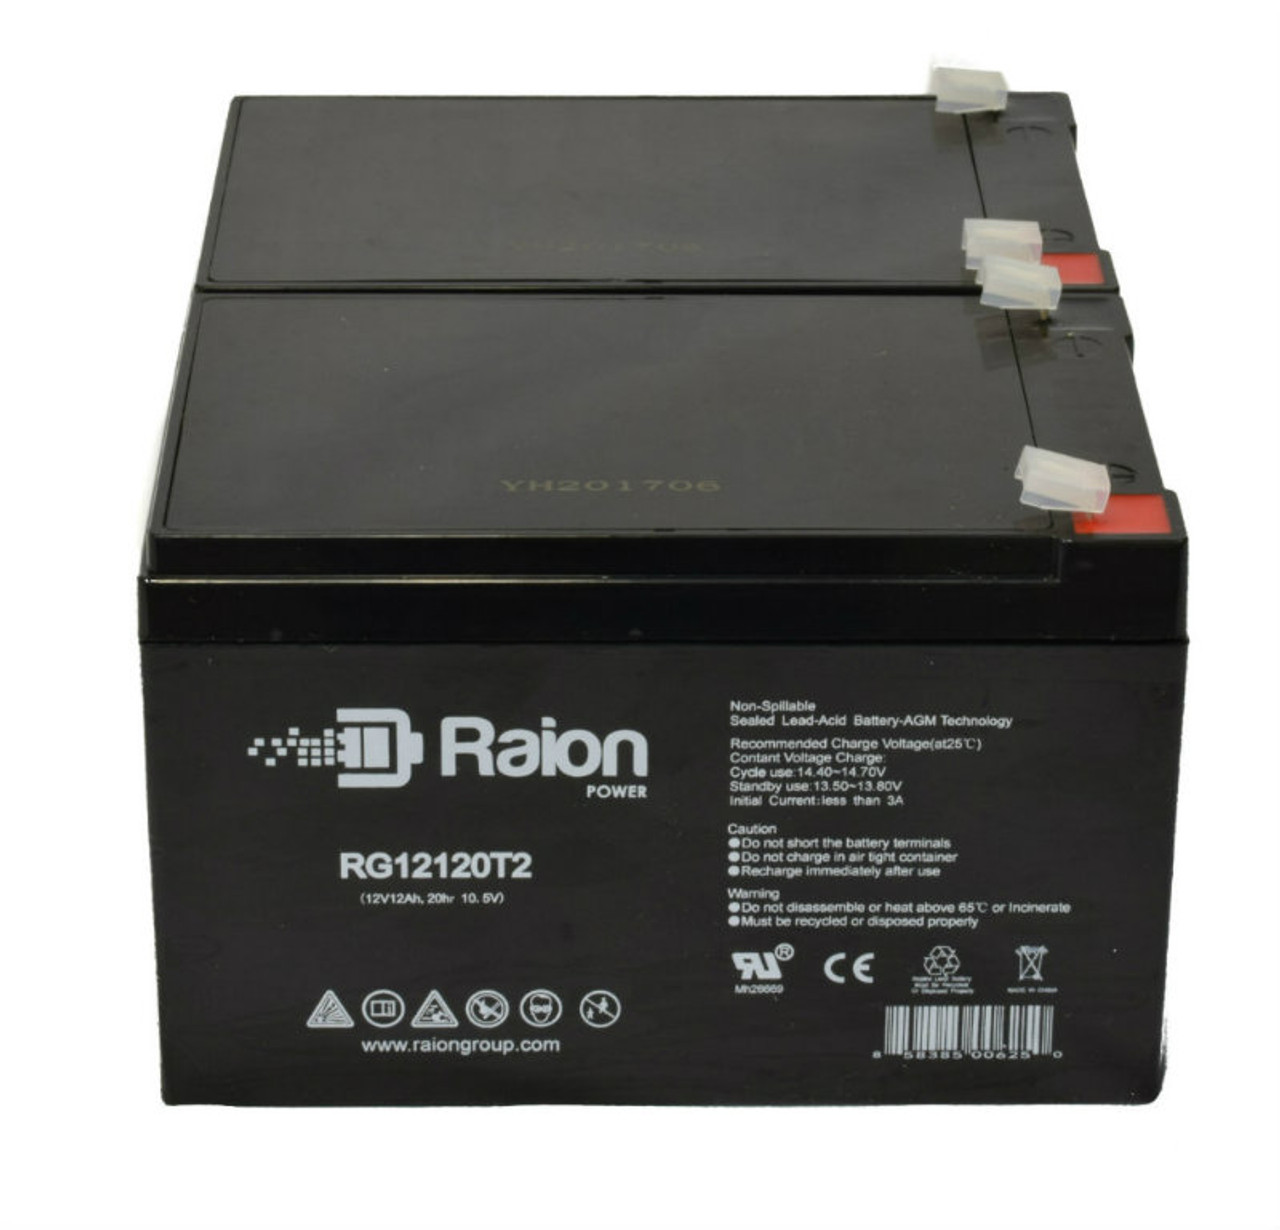 Raion Power RG12120T2 Replacement Battery Set for Pride Mobility Go-Chair Mobility Scooter - 2 Pack